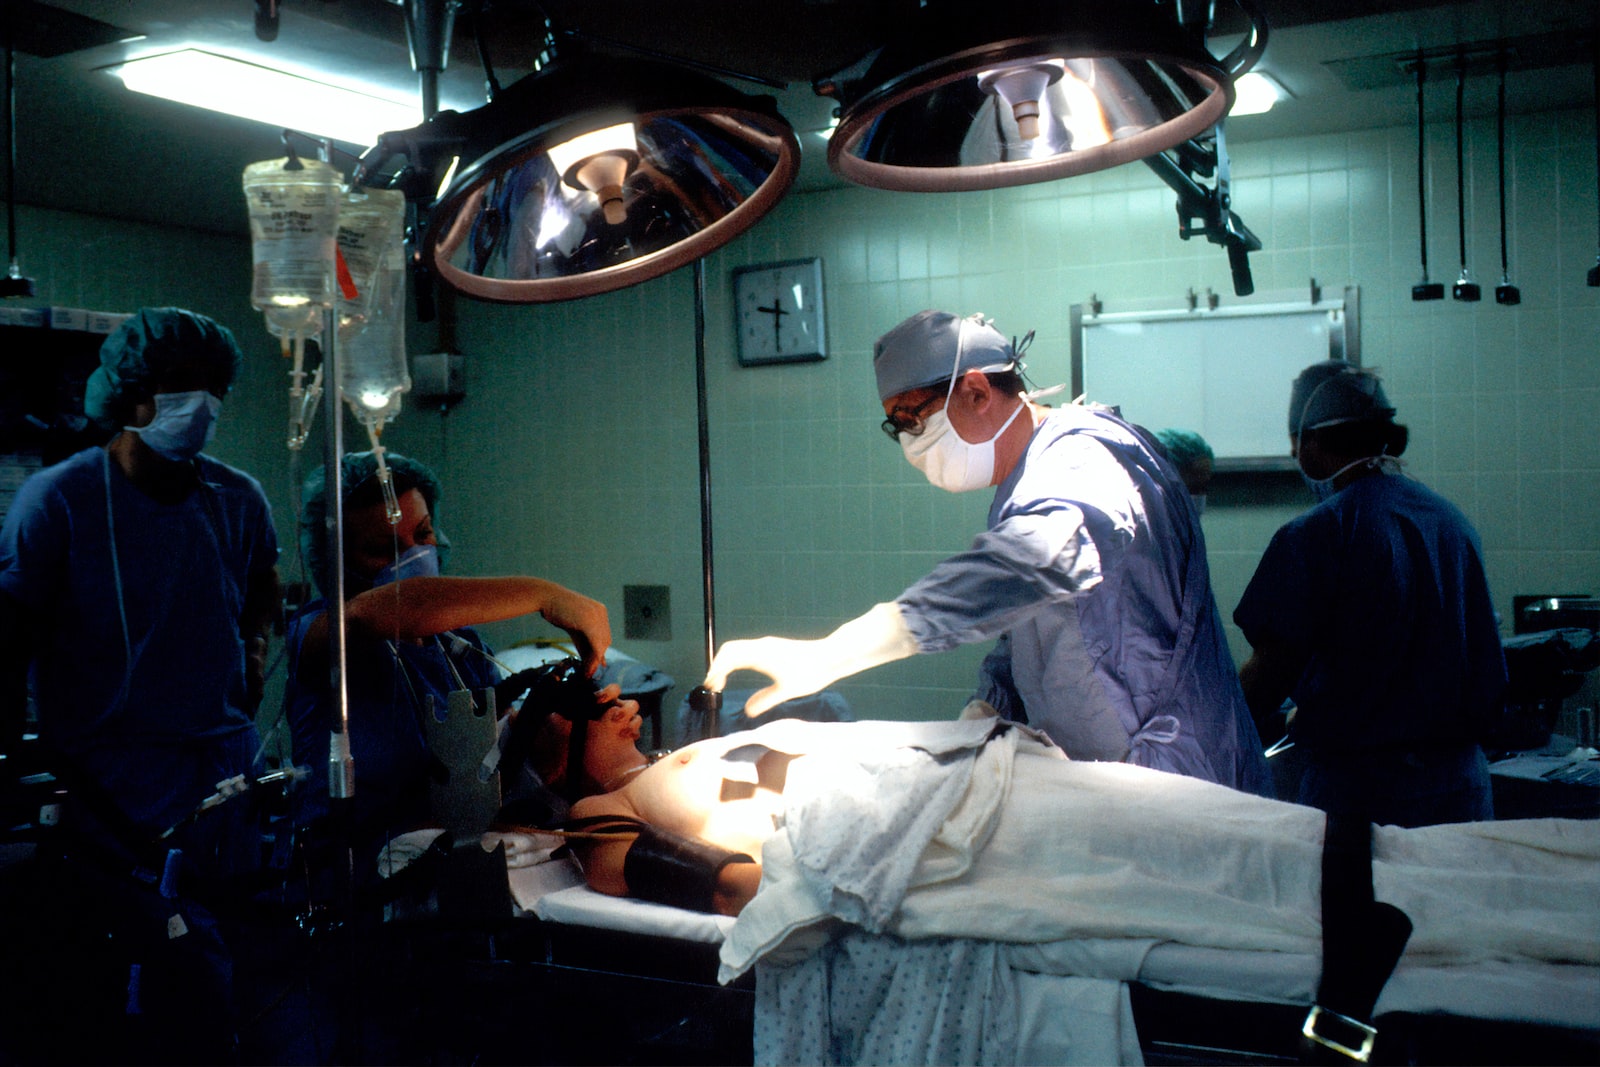 Cosmetic Surgery doctor and nurses inside operating room